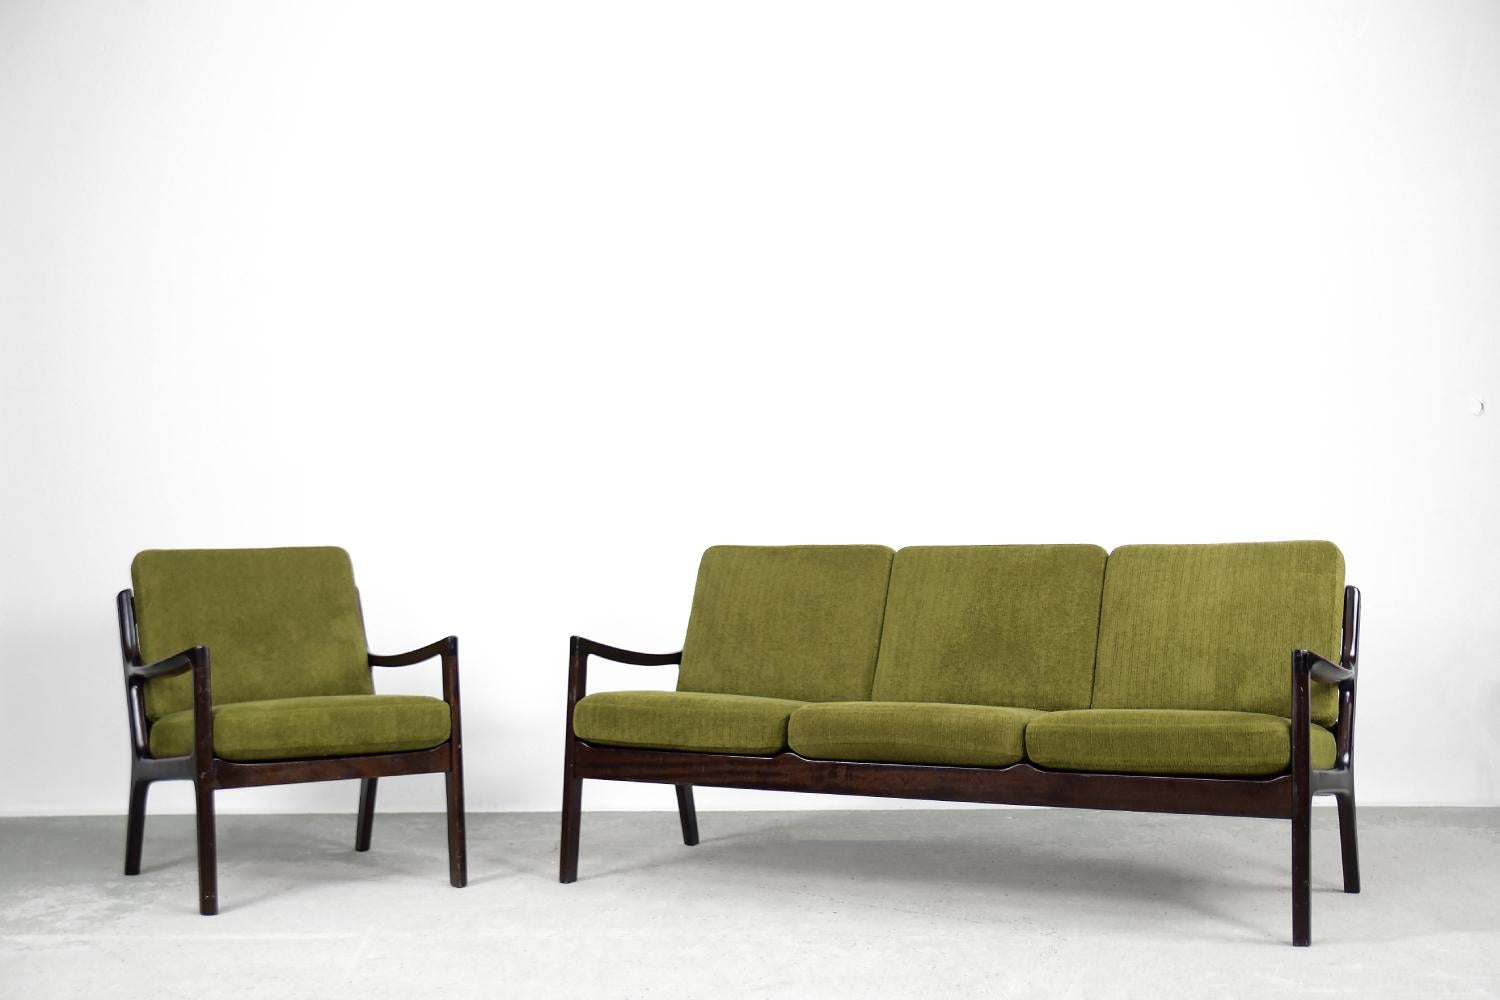 This elegant Senator lounge set, consists of a three-seater sofa and armchair, was designed by Ole Wanscher for the Danish Cado manufacture in the 1960s. The frame is made of wood in dark chocolate colour. The backrest is characterized by an